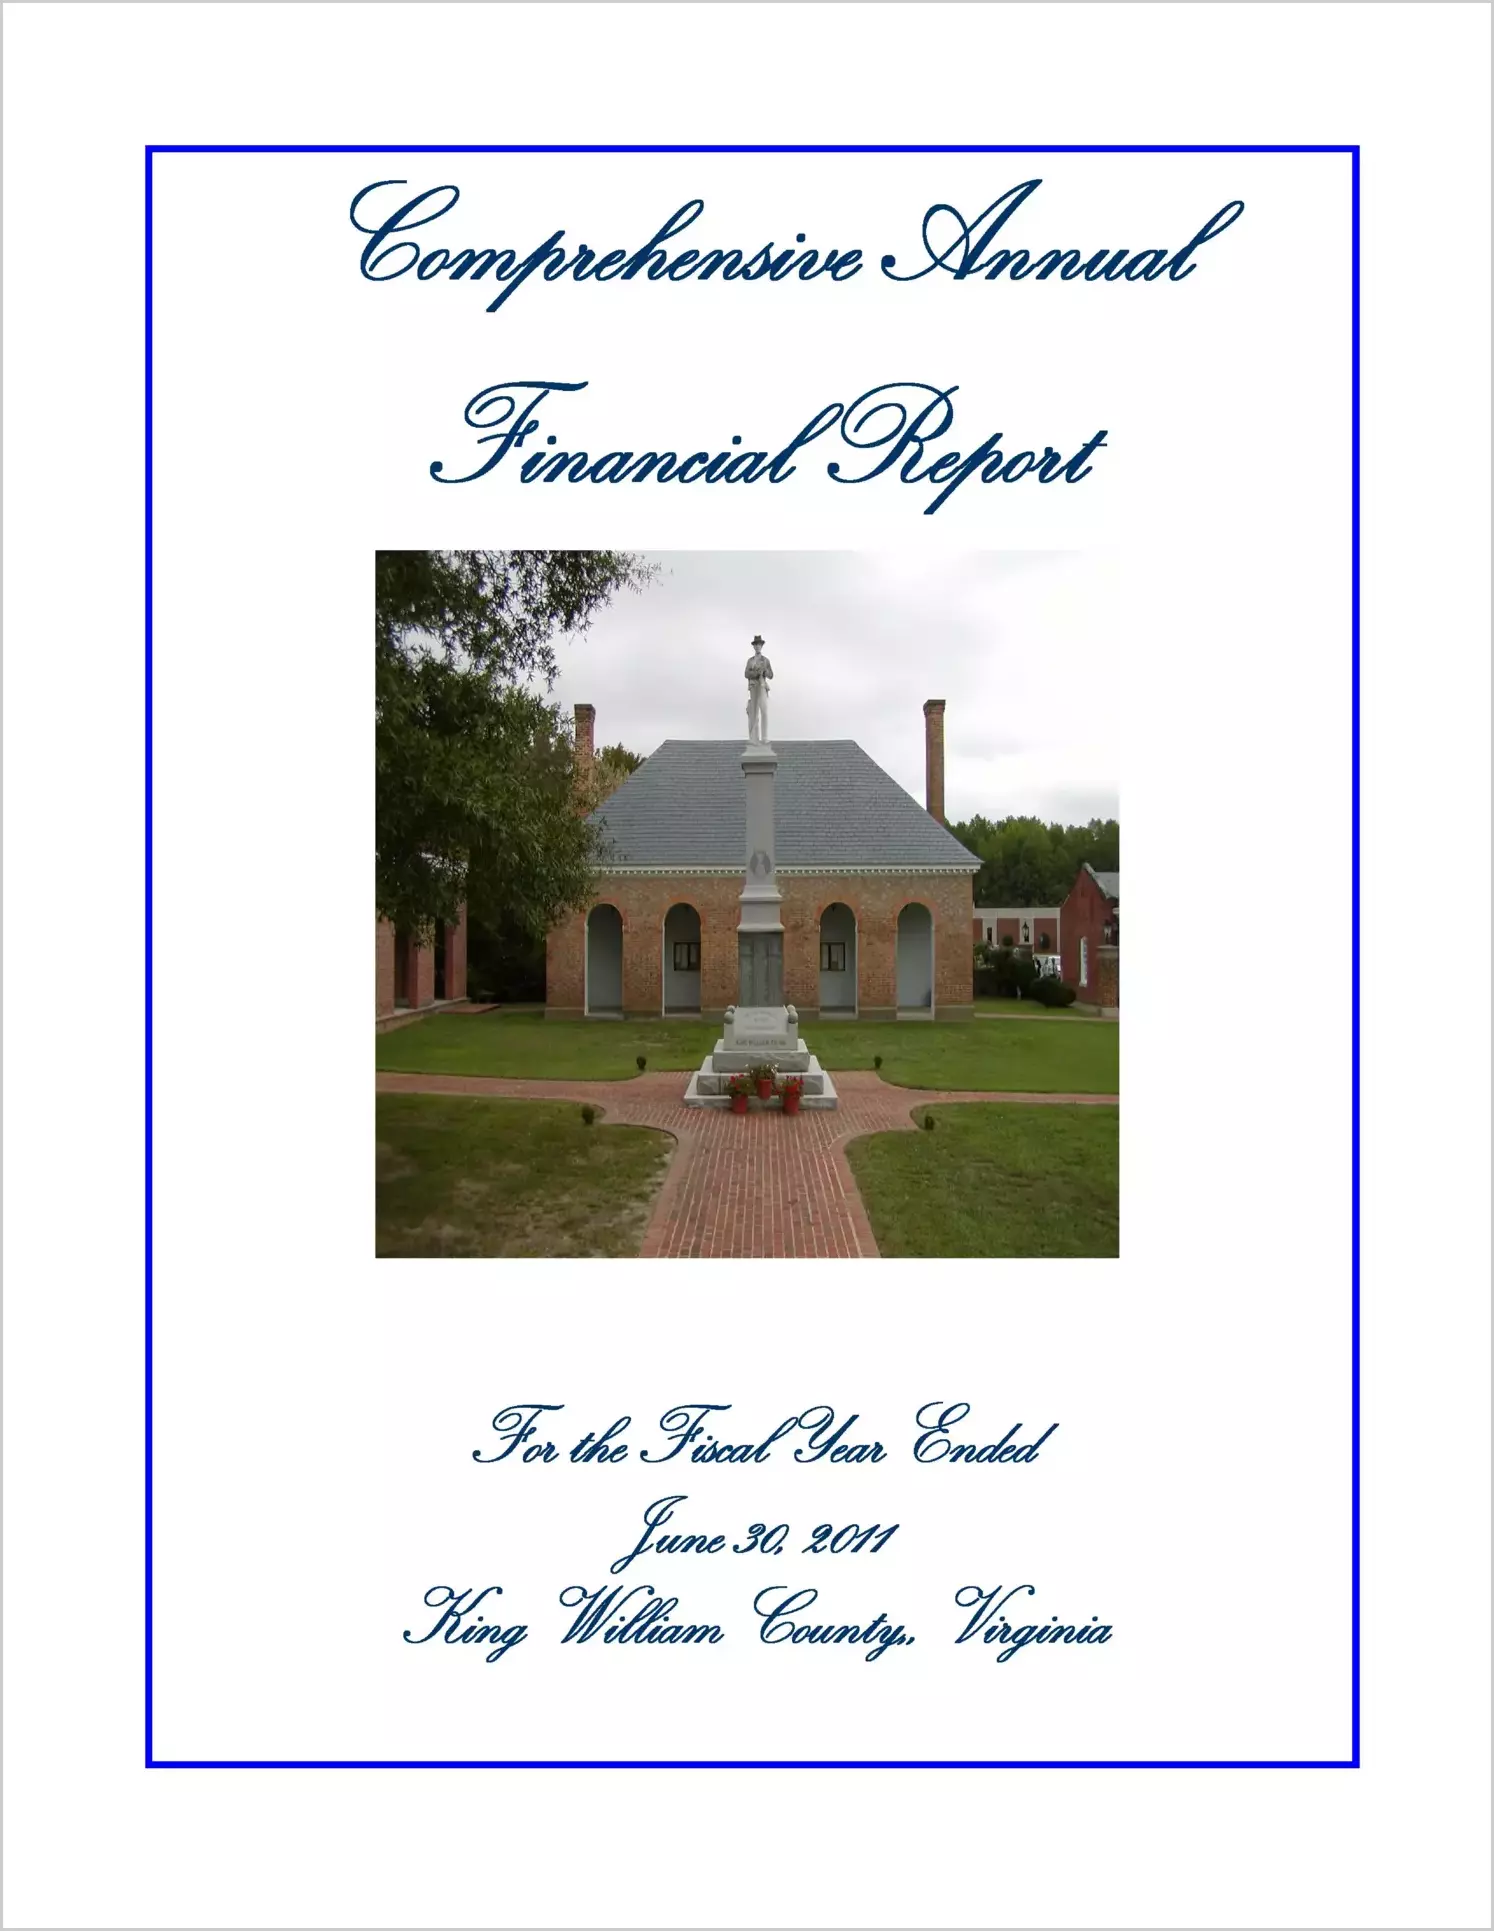 2011 Annual Financial Report for County of King William